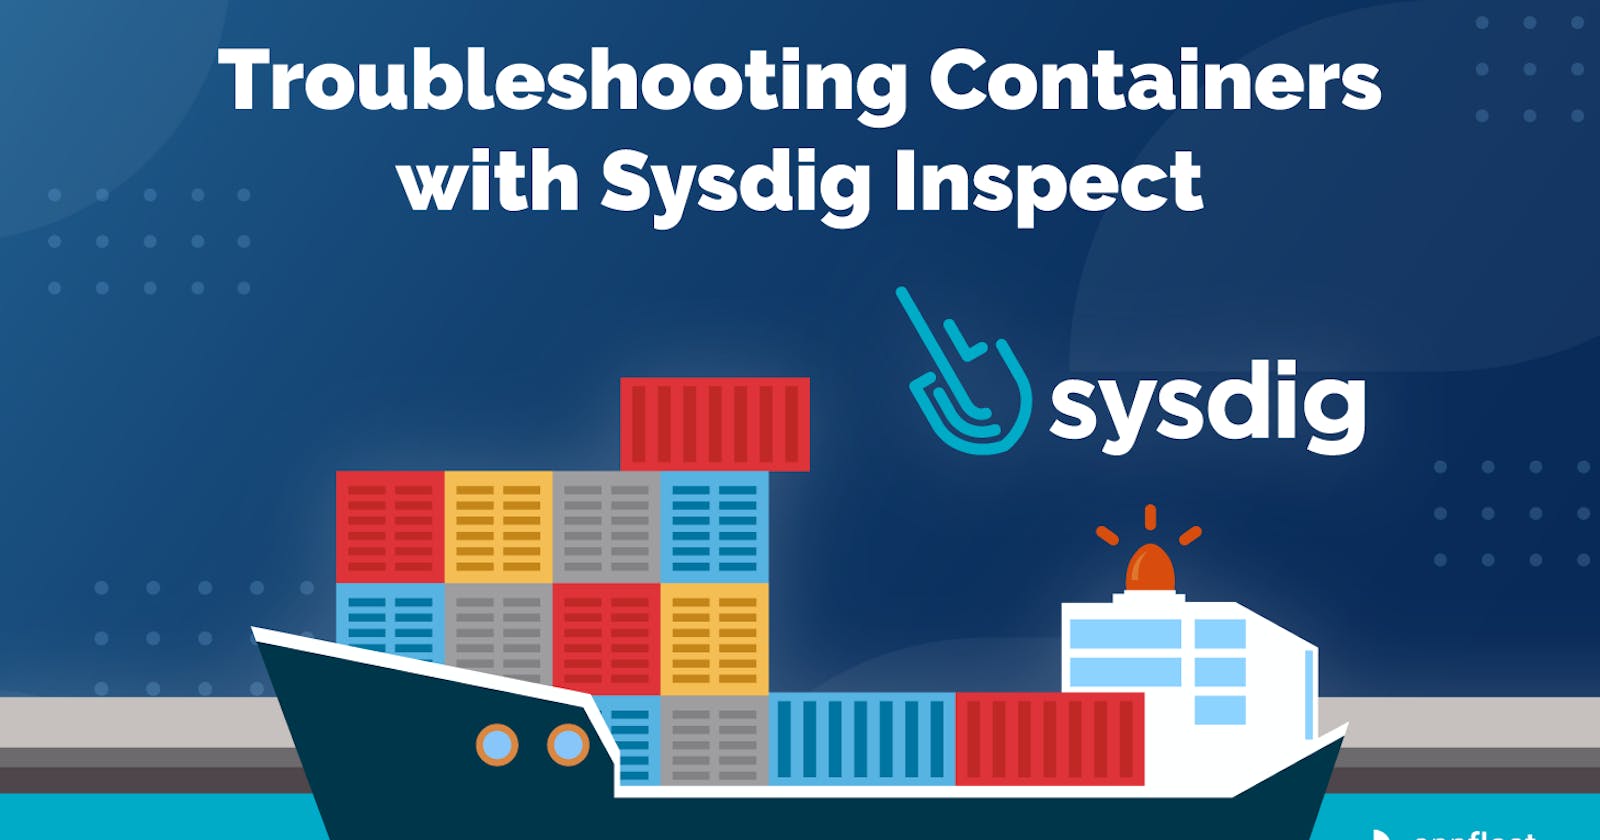 Troubleshooting Containers with Sysdig Inspect